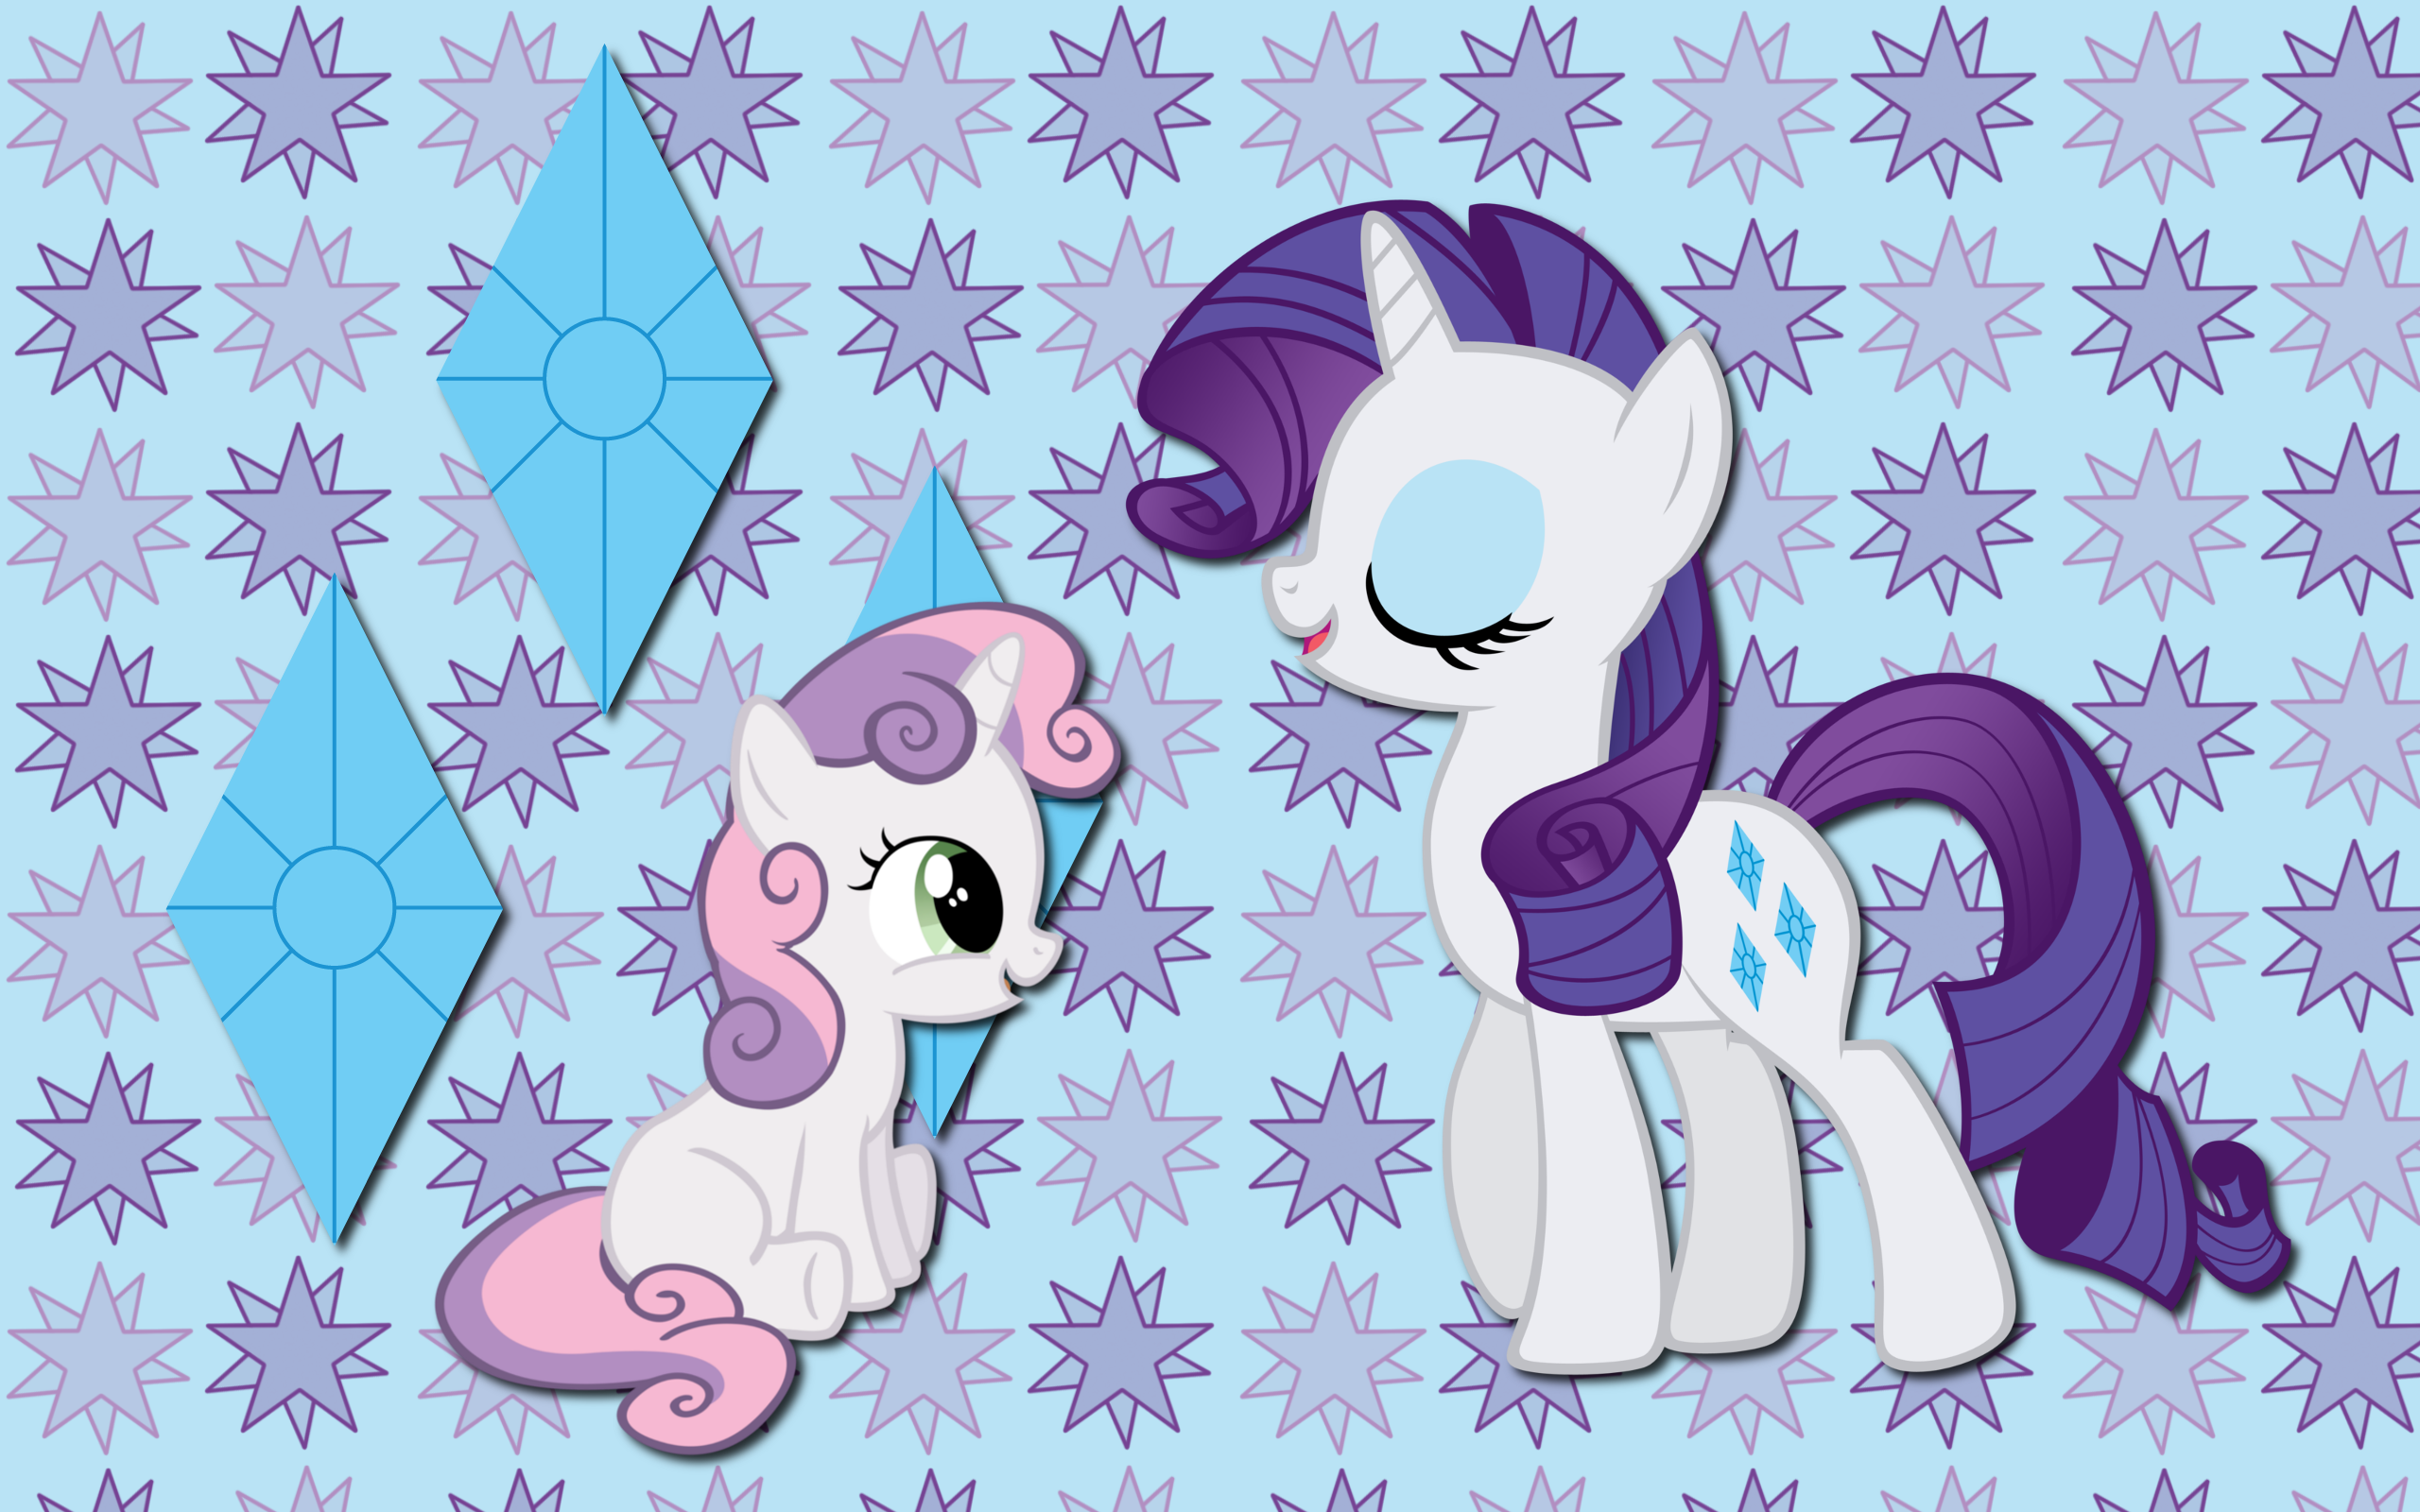 Rarity and Sweetie WP by adamlhumphreys, AliceHumanSacrifice0, MoongazePonies and ooklah